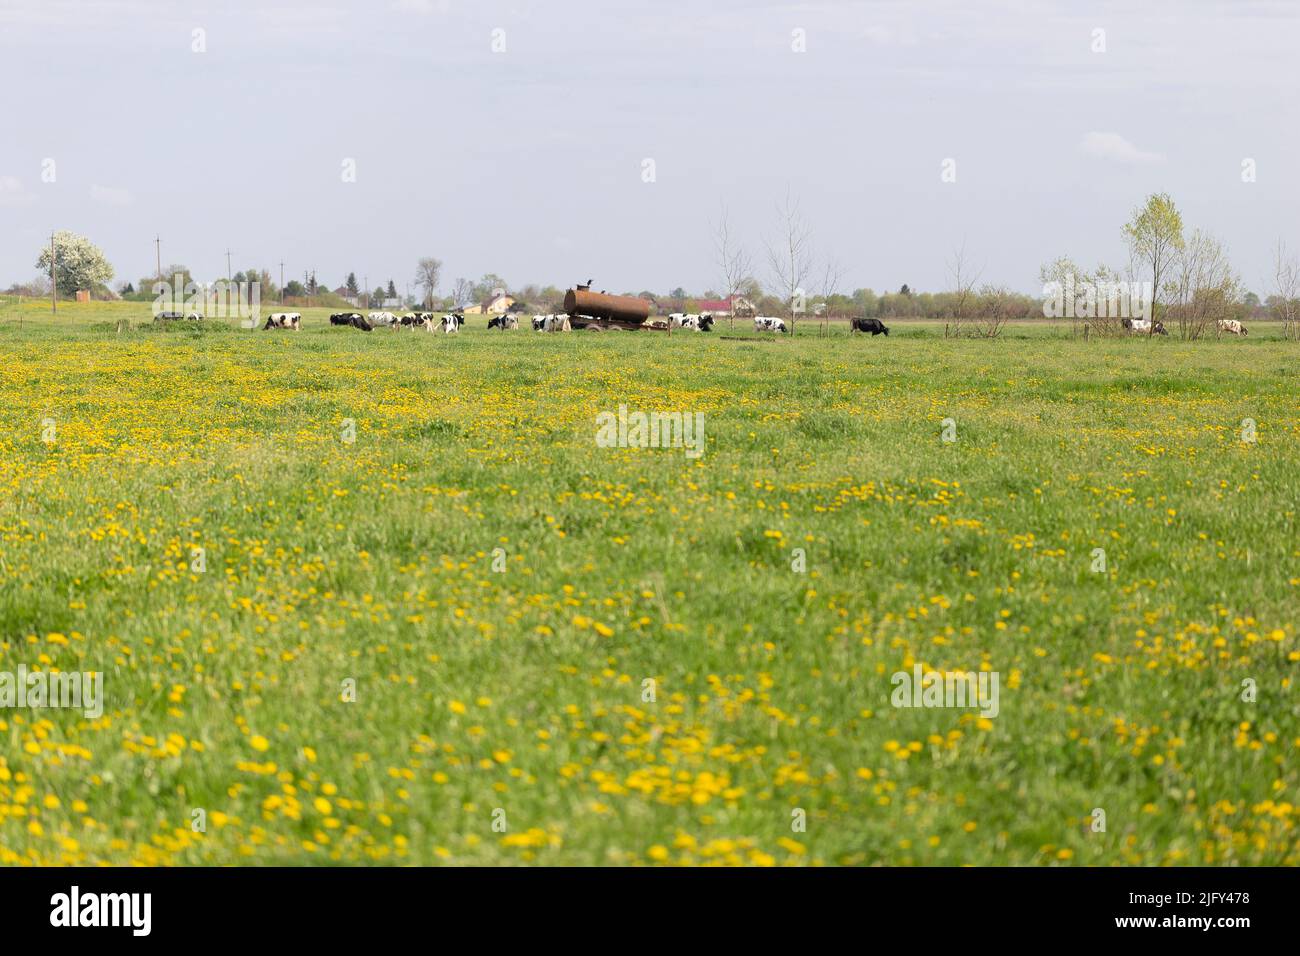 A herd of cows graze in a pasture with a mass of common dandelion in the foreground. Pasture, cows, rural landscape, agricultural theme. Stock Photo